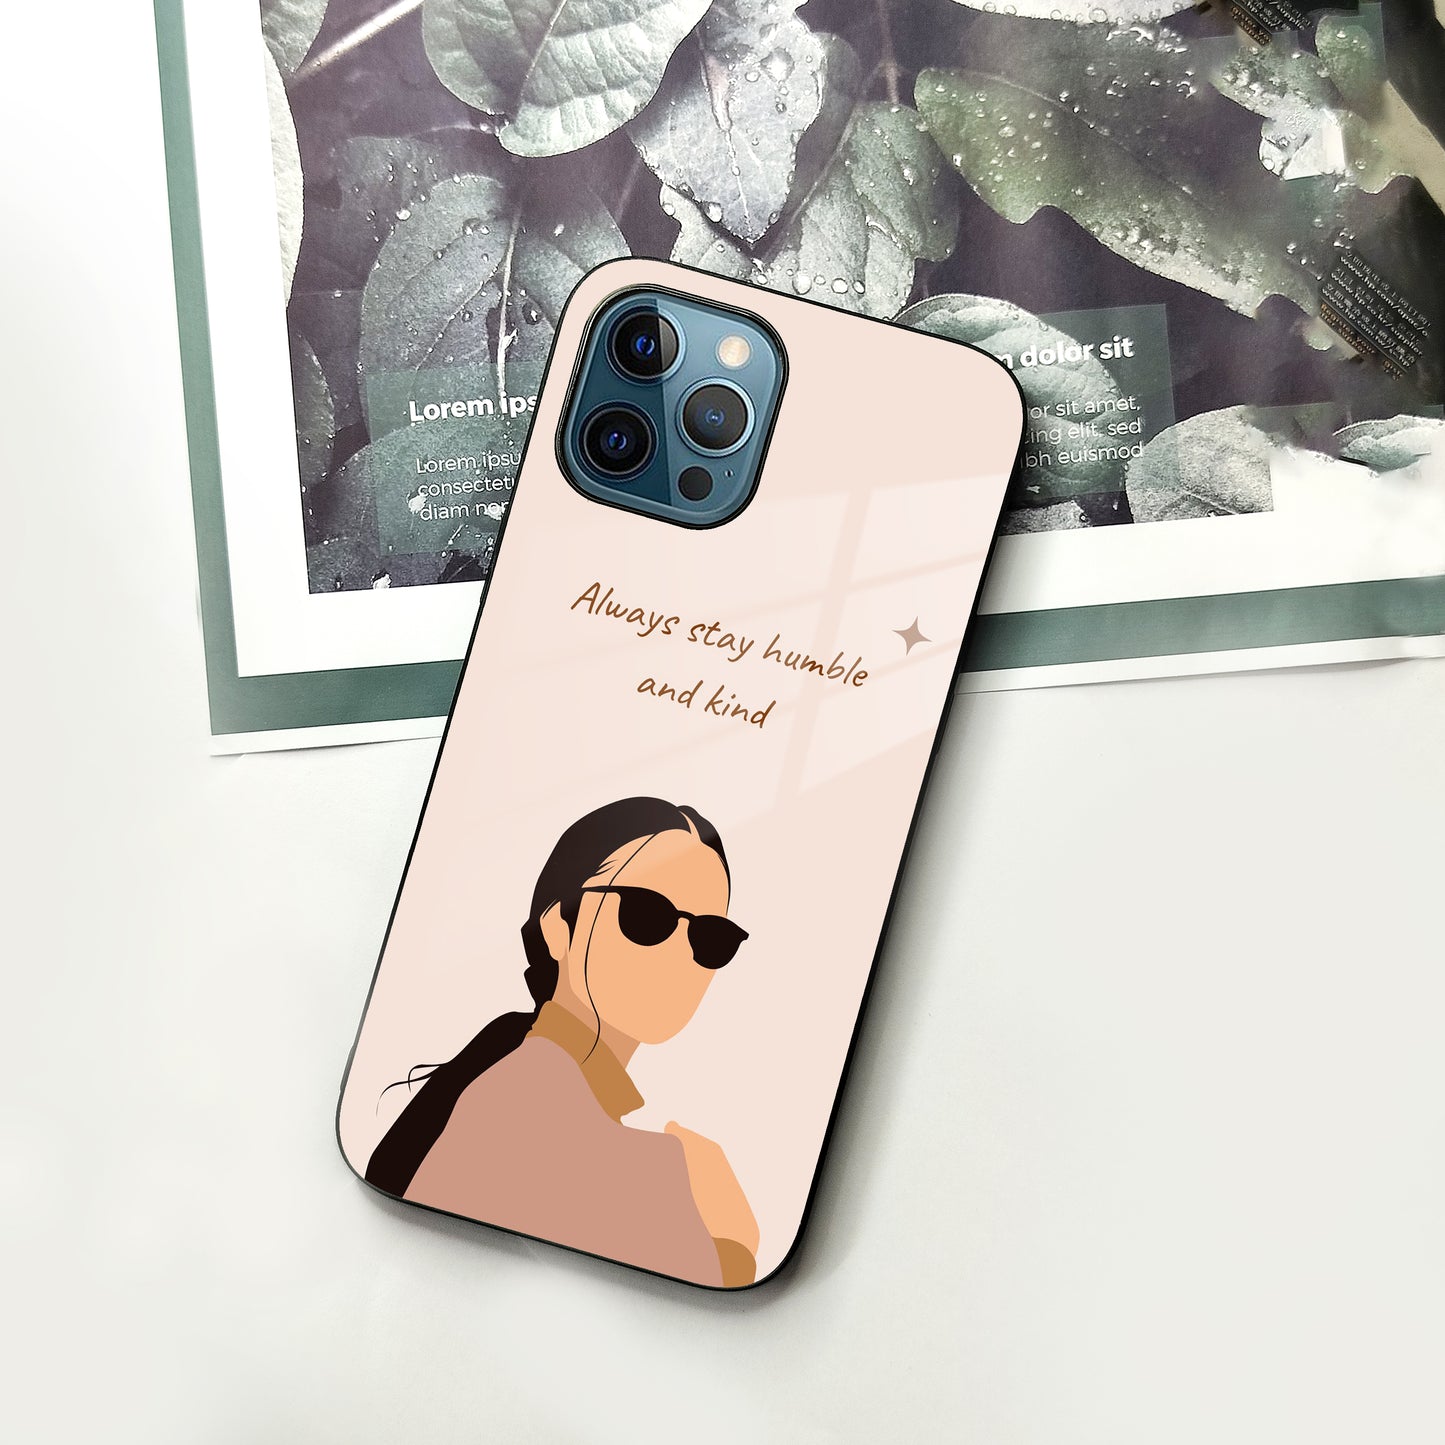 Always Stay Humble And Kind Glass Phone Cover for iPhone